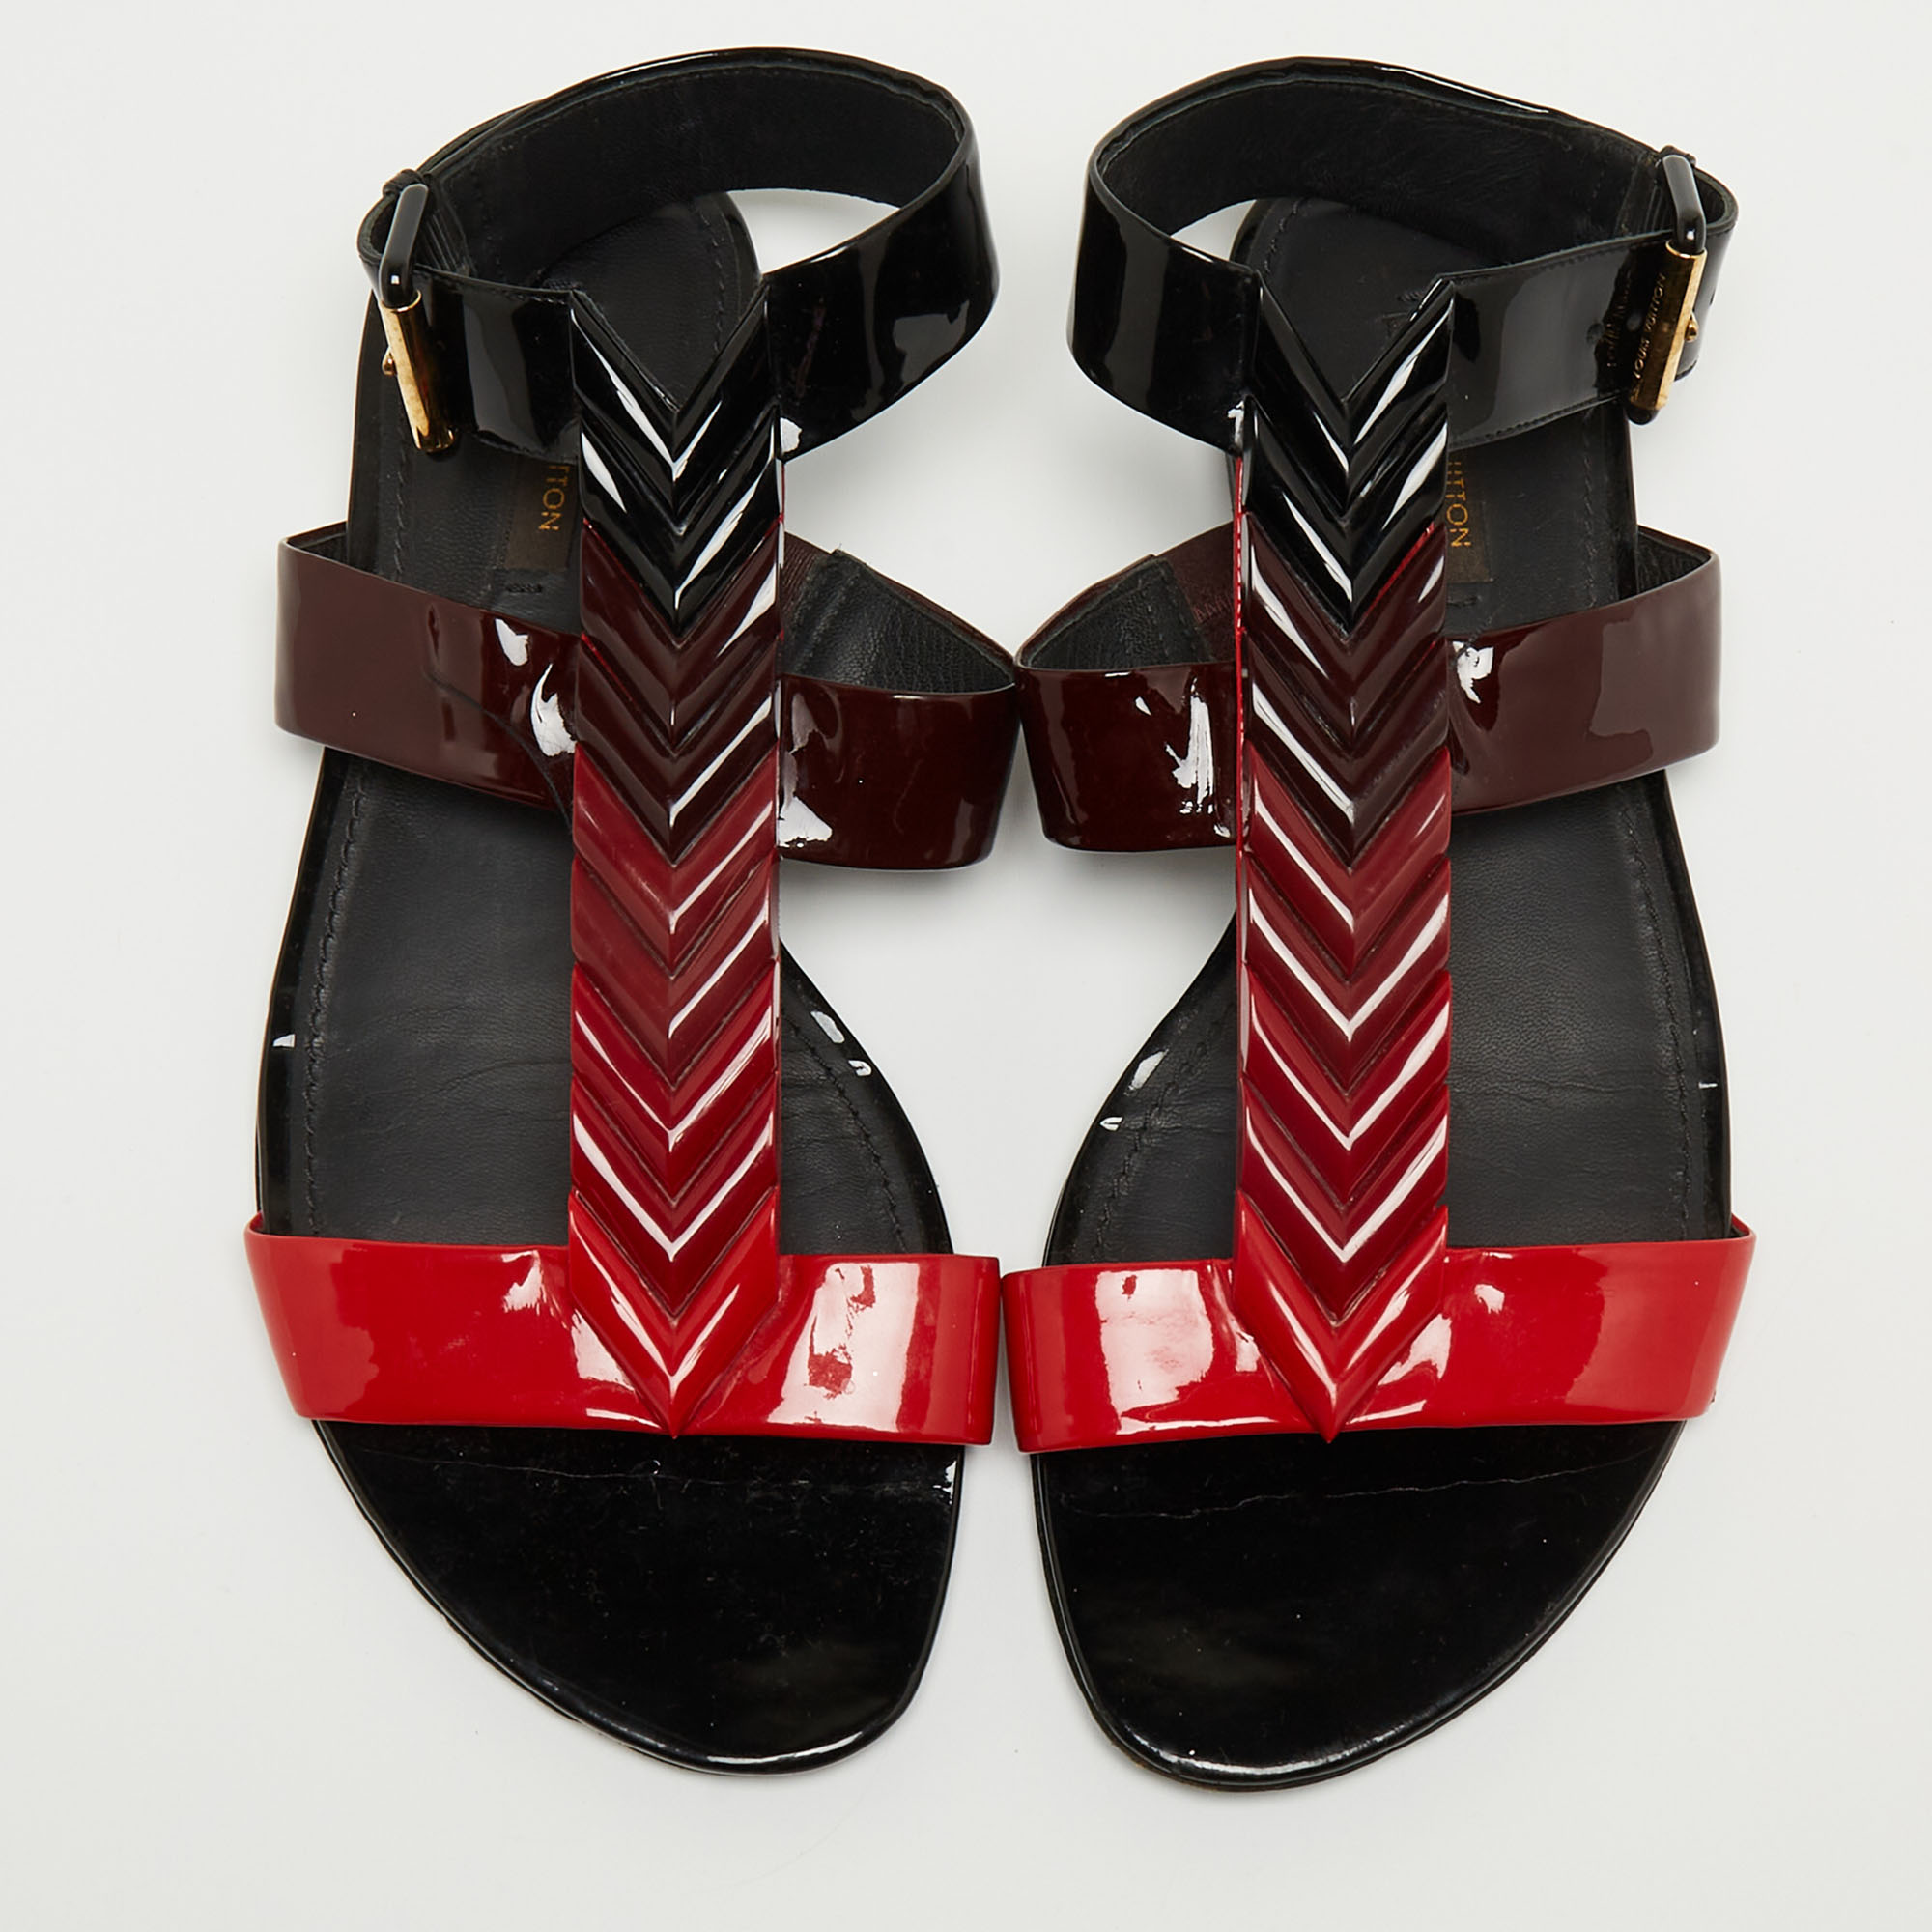 Louis Vuitton Red/Black Ombre Patent Leather Flat Sandals Size 39